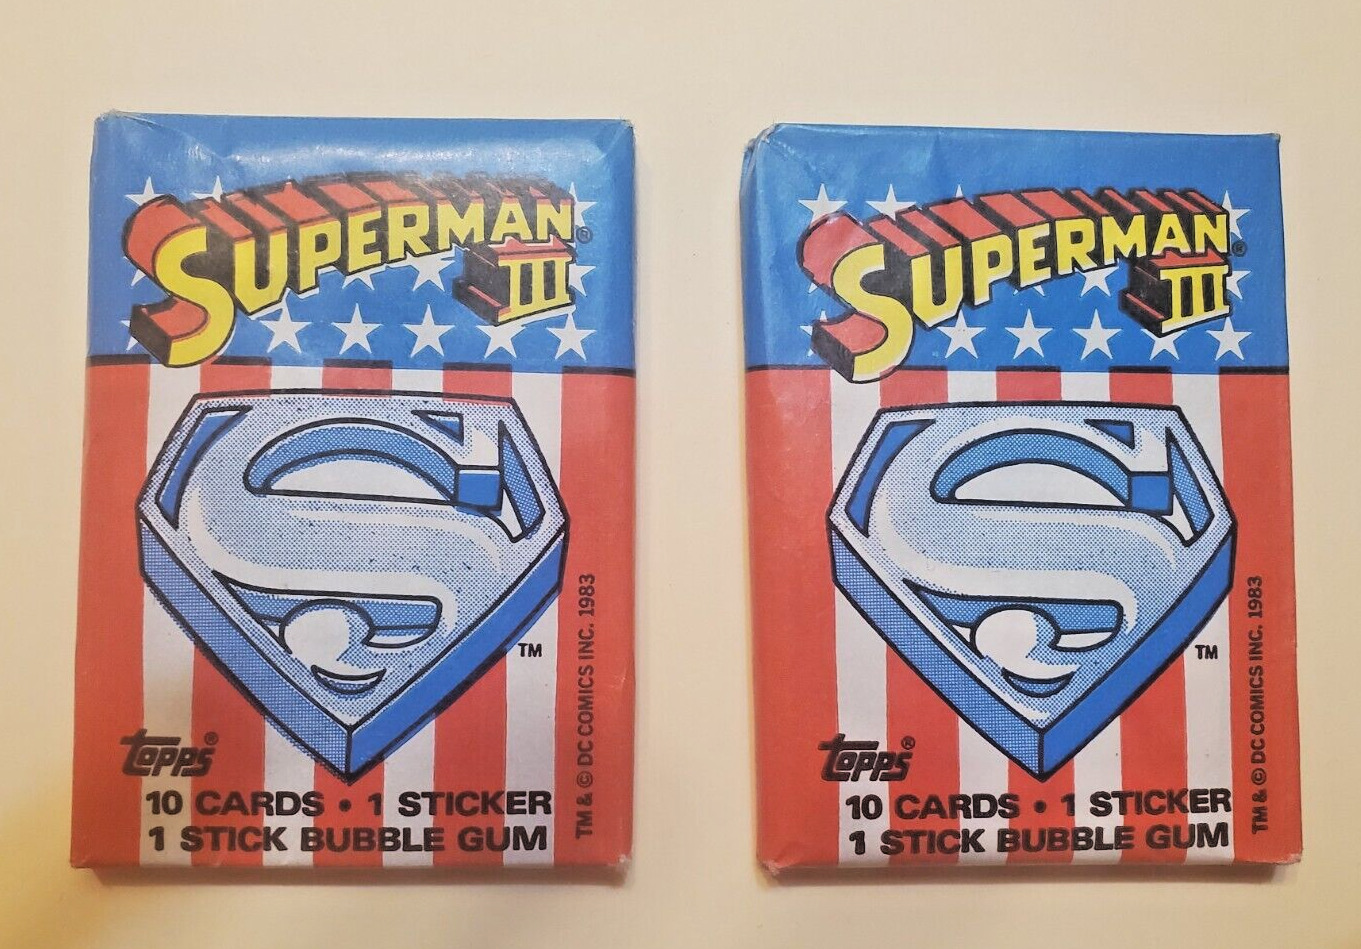 1983 Topps Superman 3 Movie Wax Pack Trading Cards - Brand New Unopened Lot of 2